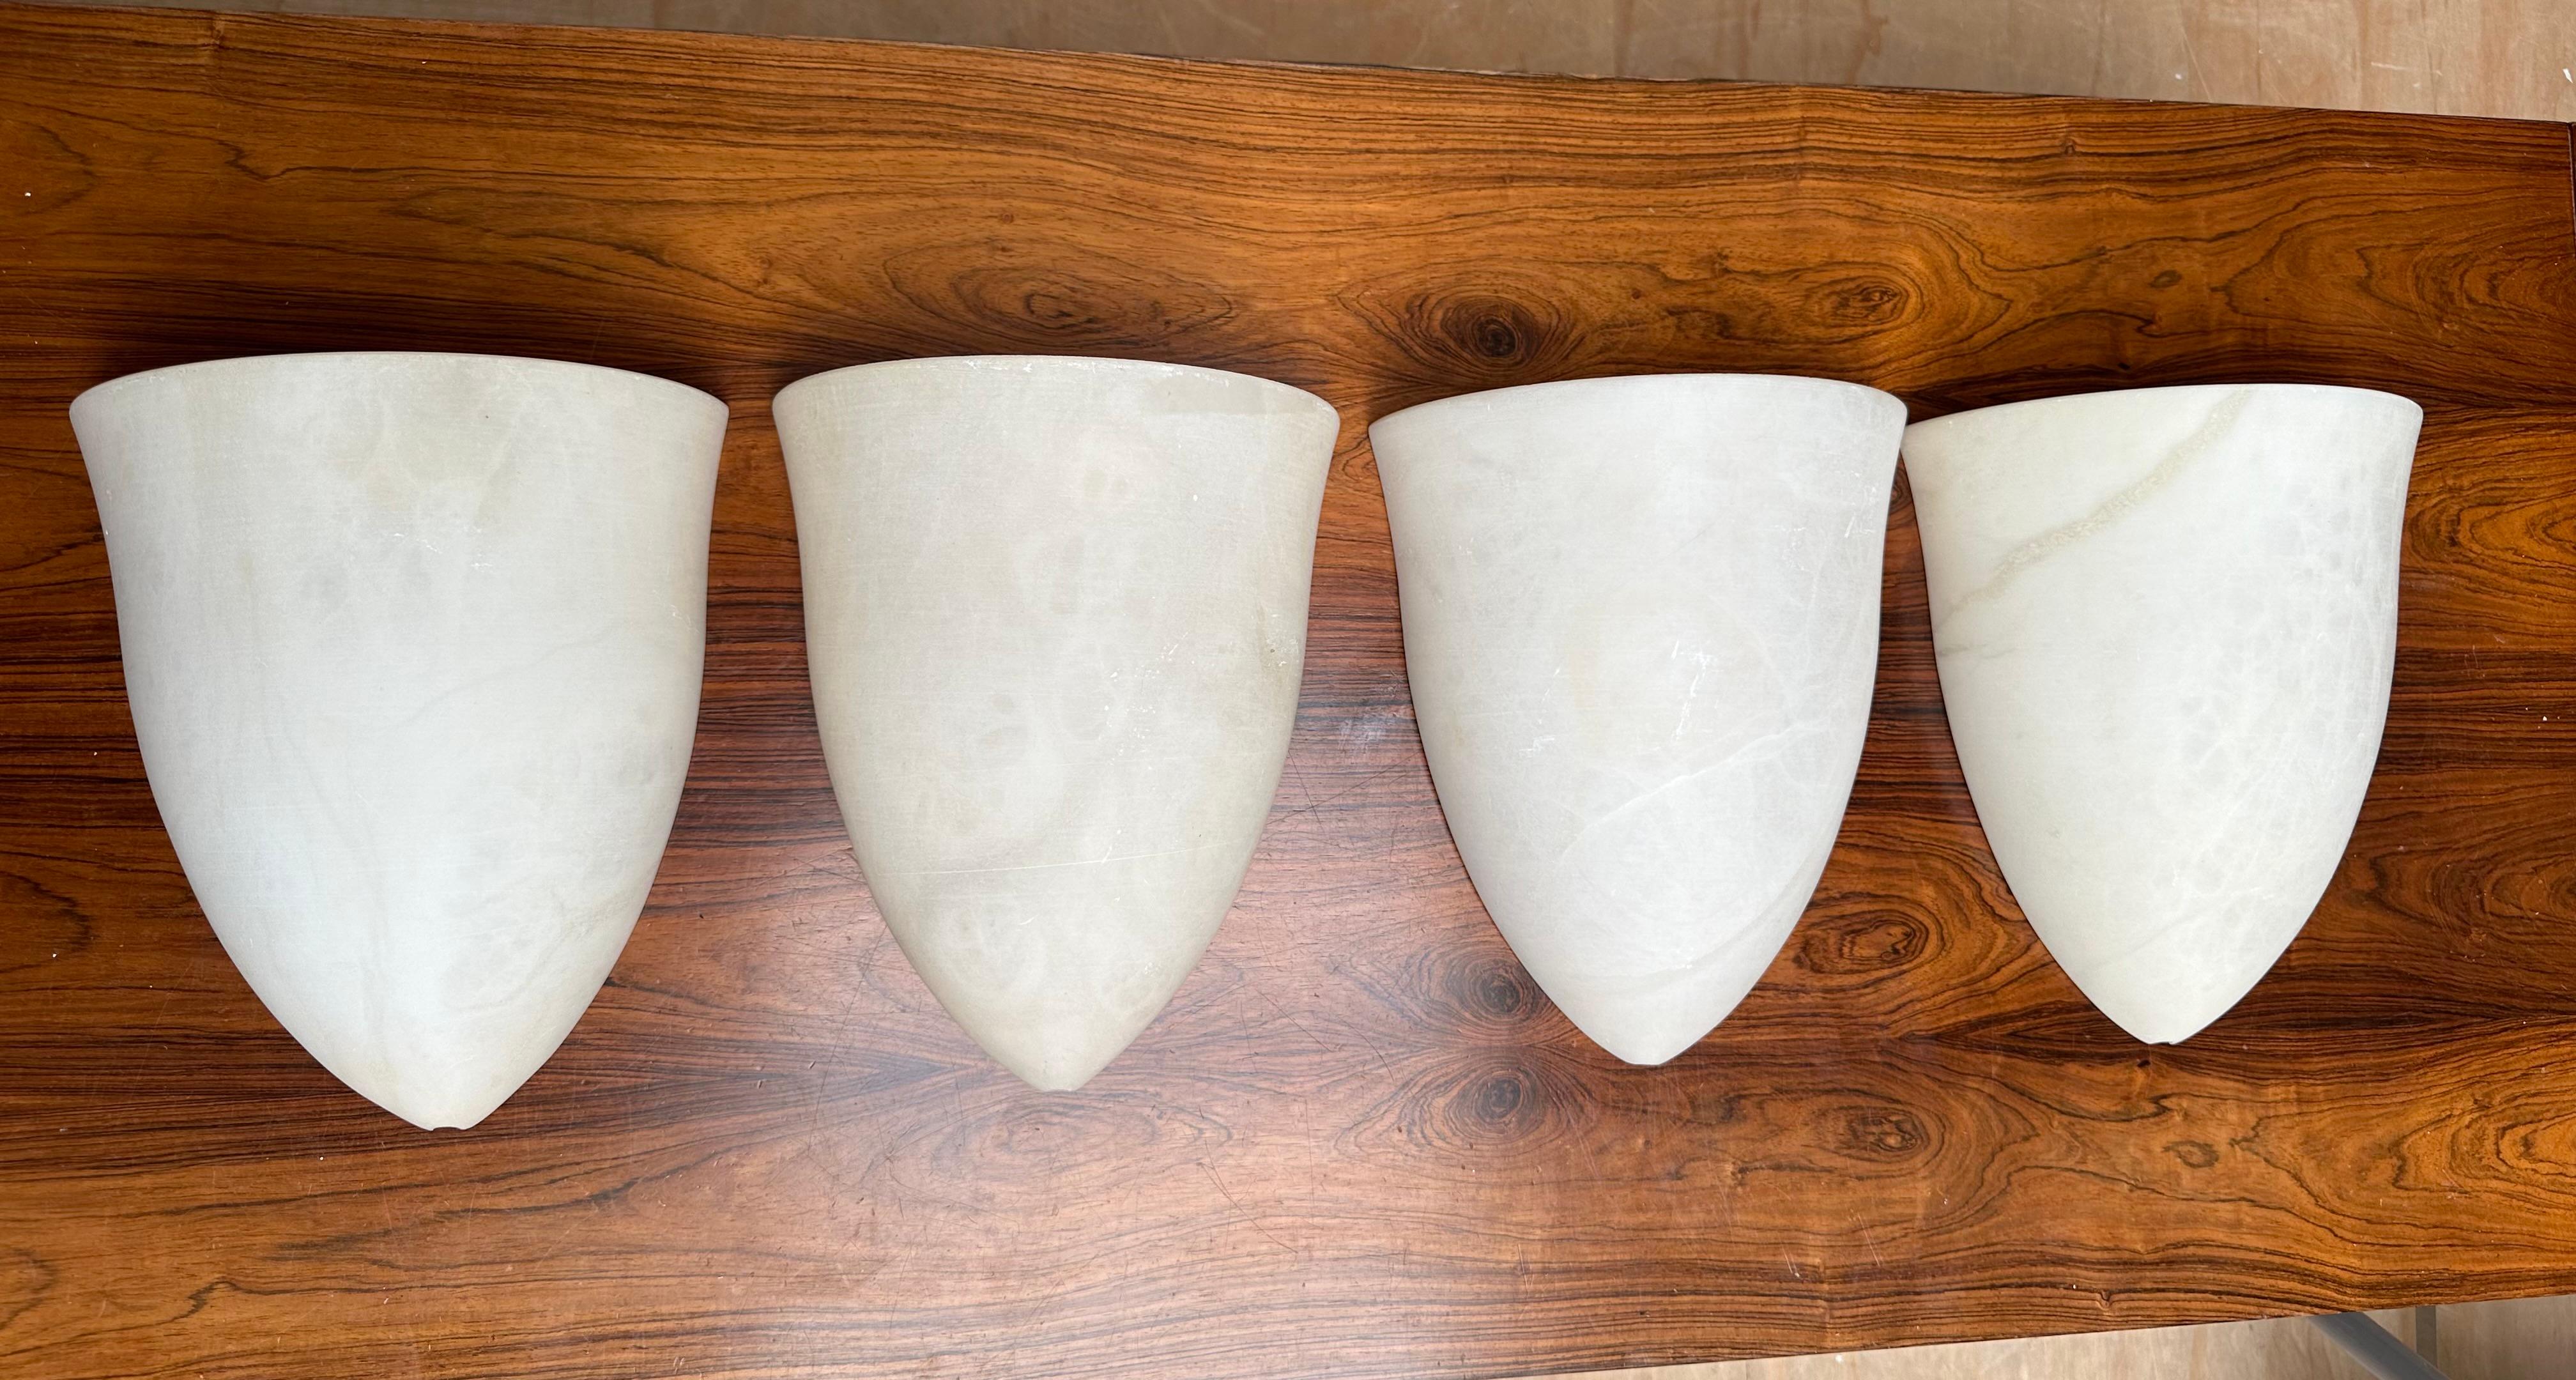 Handcrafted and very stylish set of midcentury made alabaster wall lights.

If you are looking for a great design and practical size set of four sconces to grace your living space then these natural mineral stone fixtures could be perfect. All